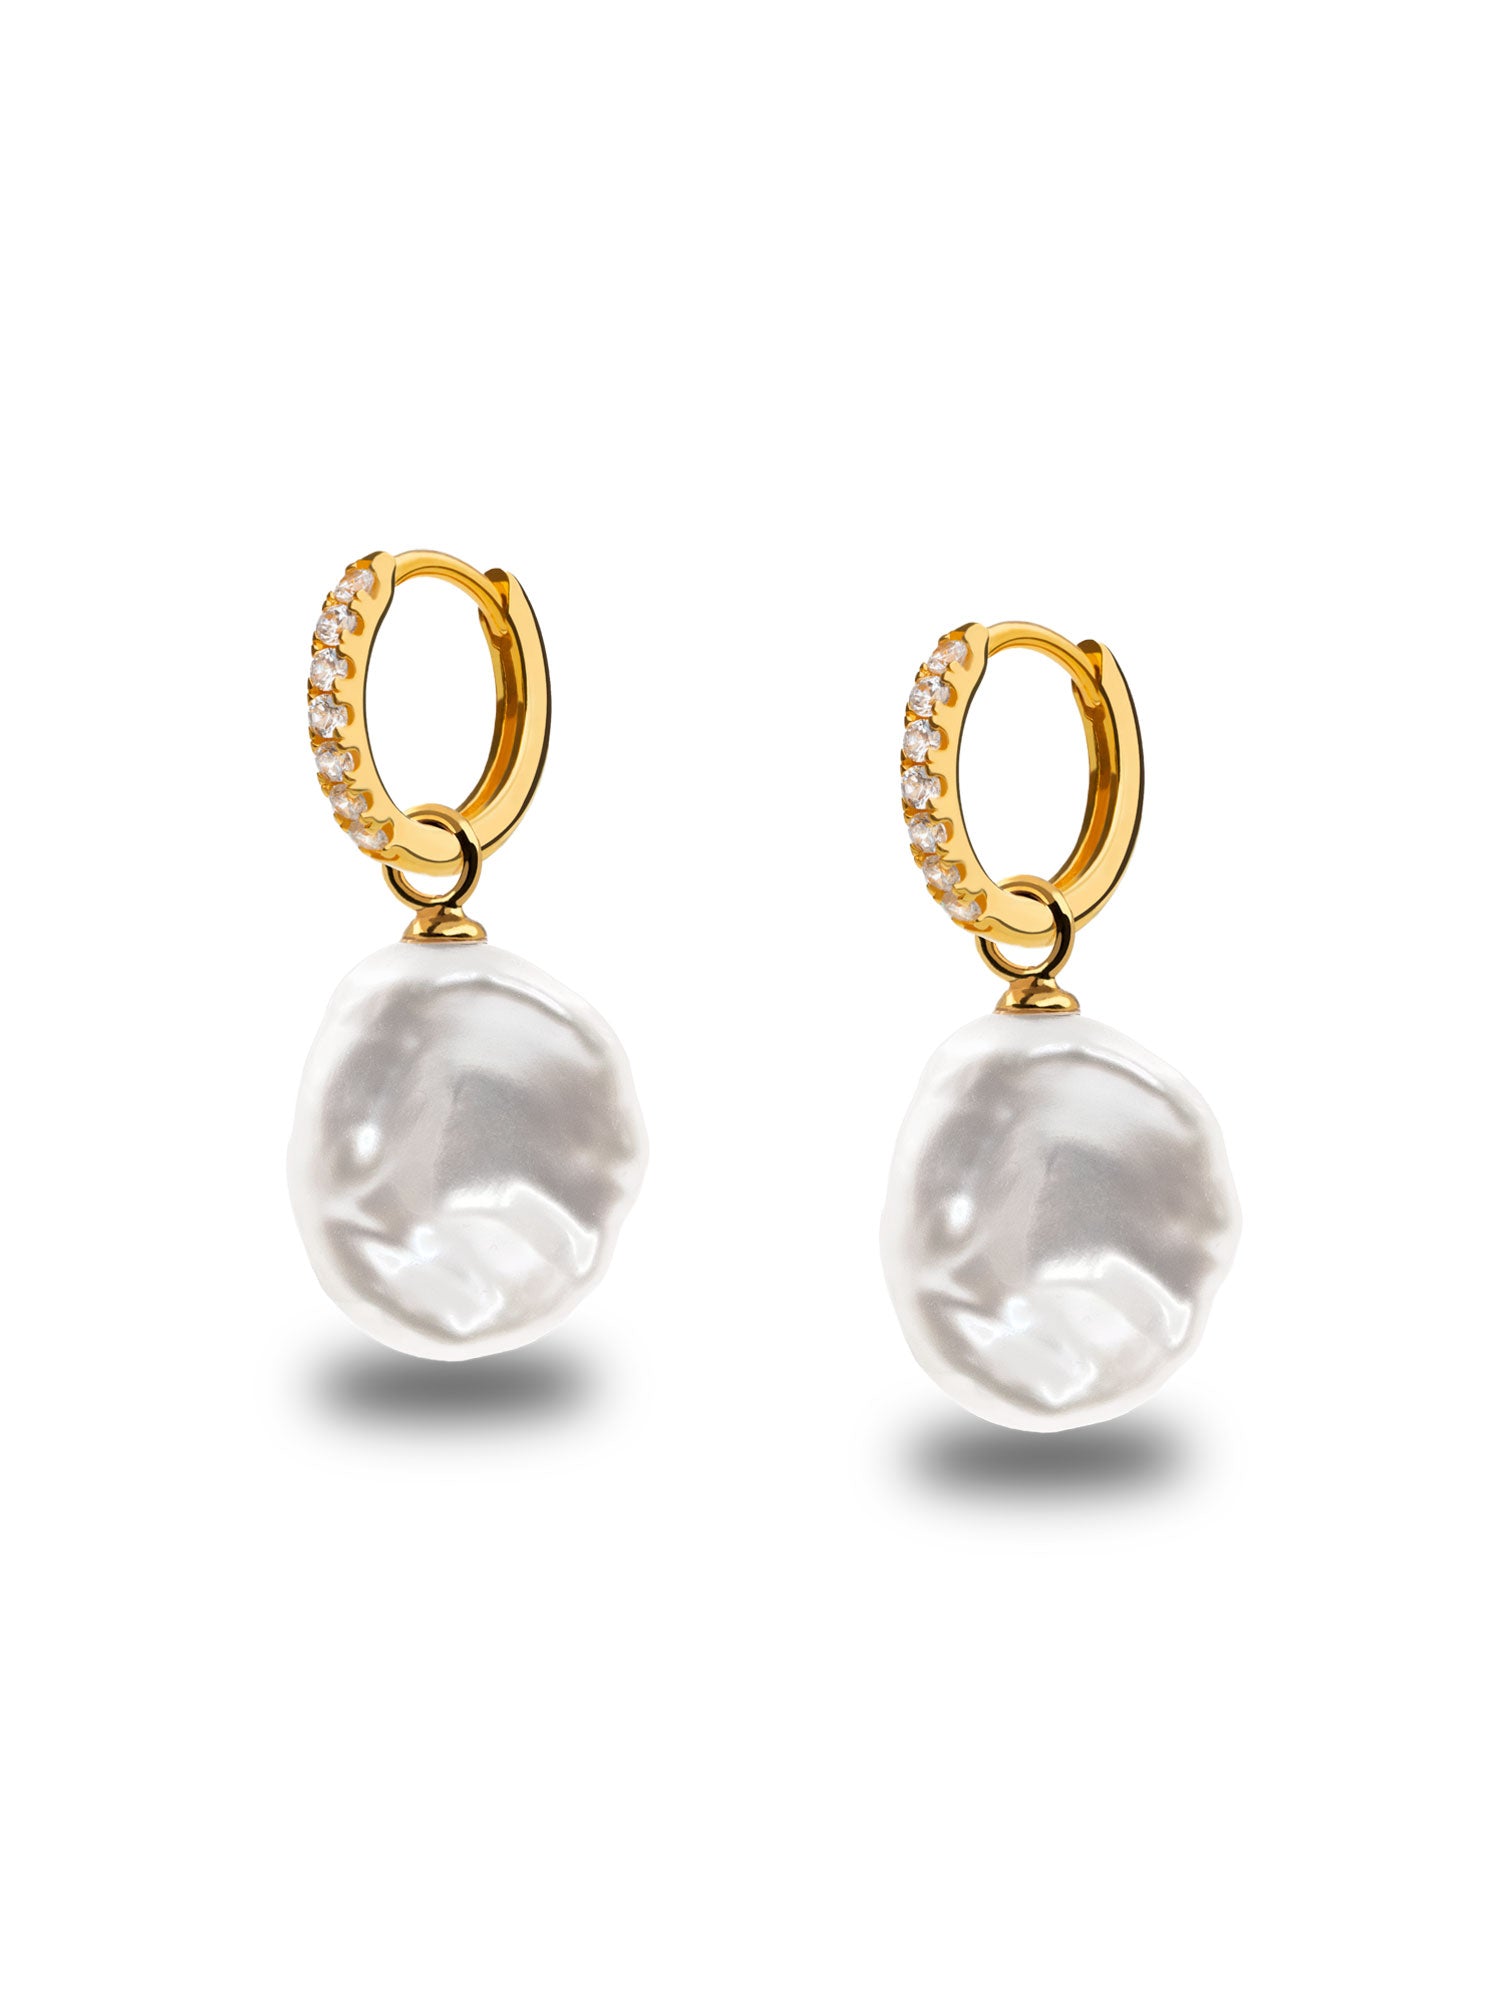 18k Gold Hoop with Diamonds and Keshi Pearl - 12 mm